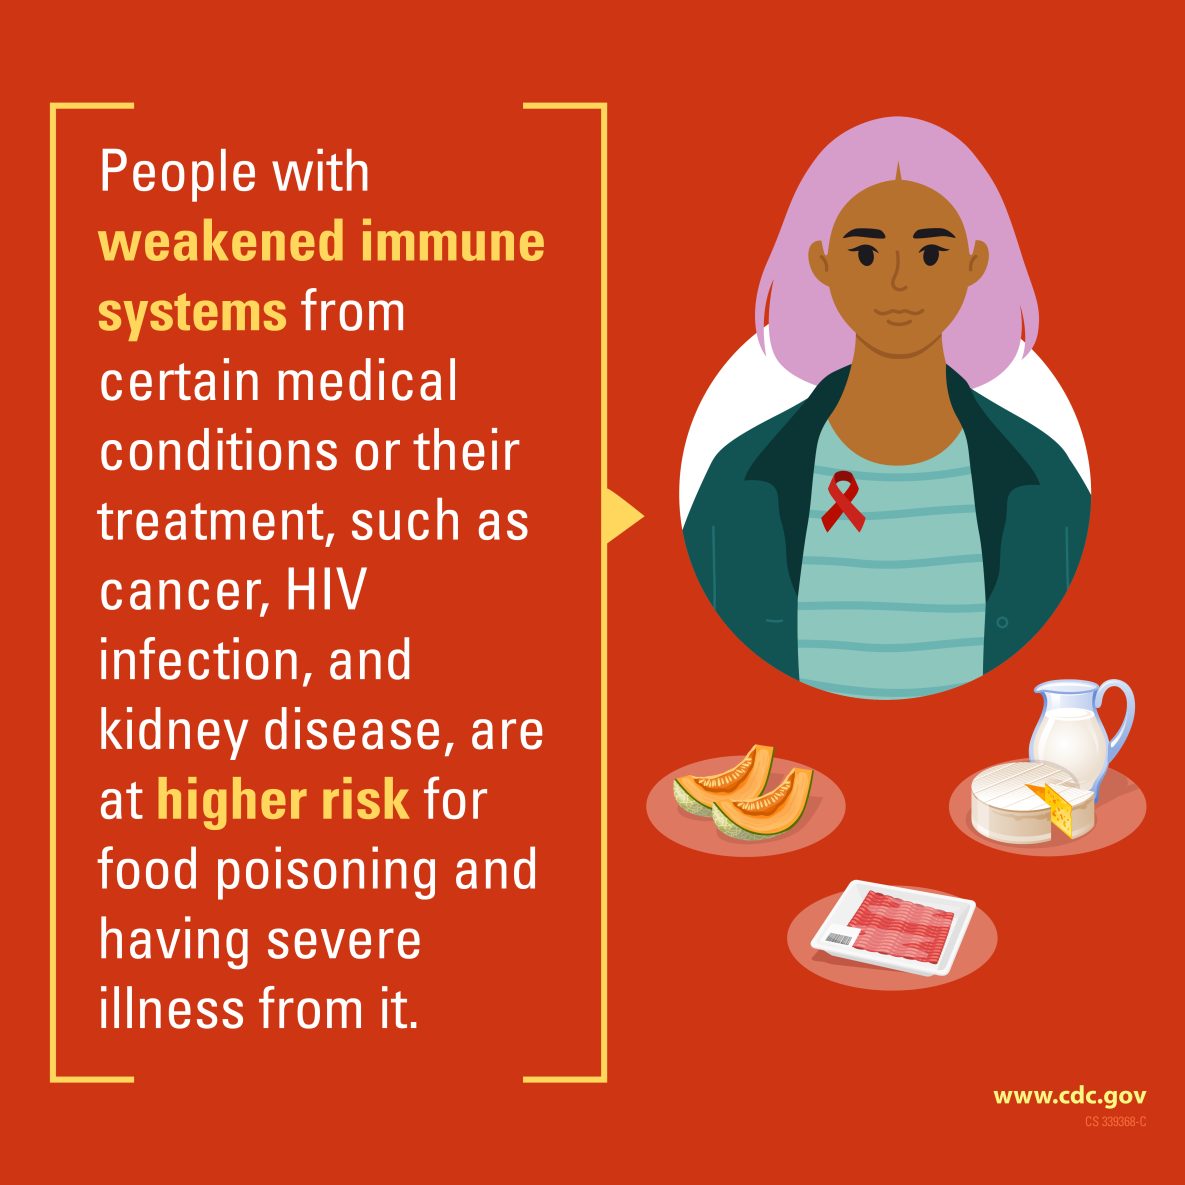 People with weakened immune systems from certain medical conditions or their treatment are at higher risk for food poisoning